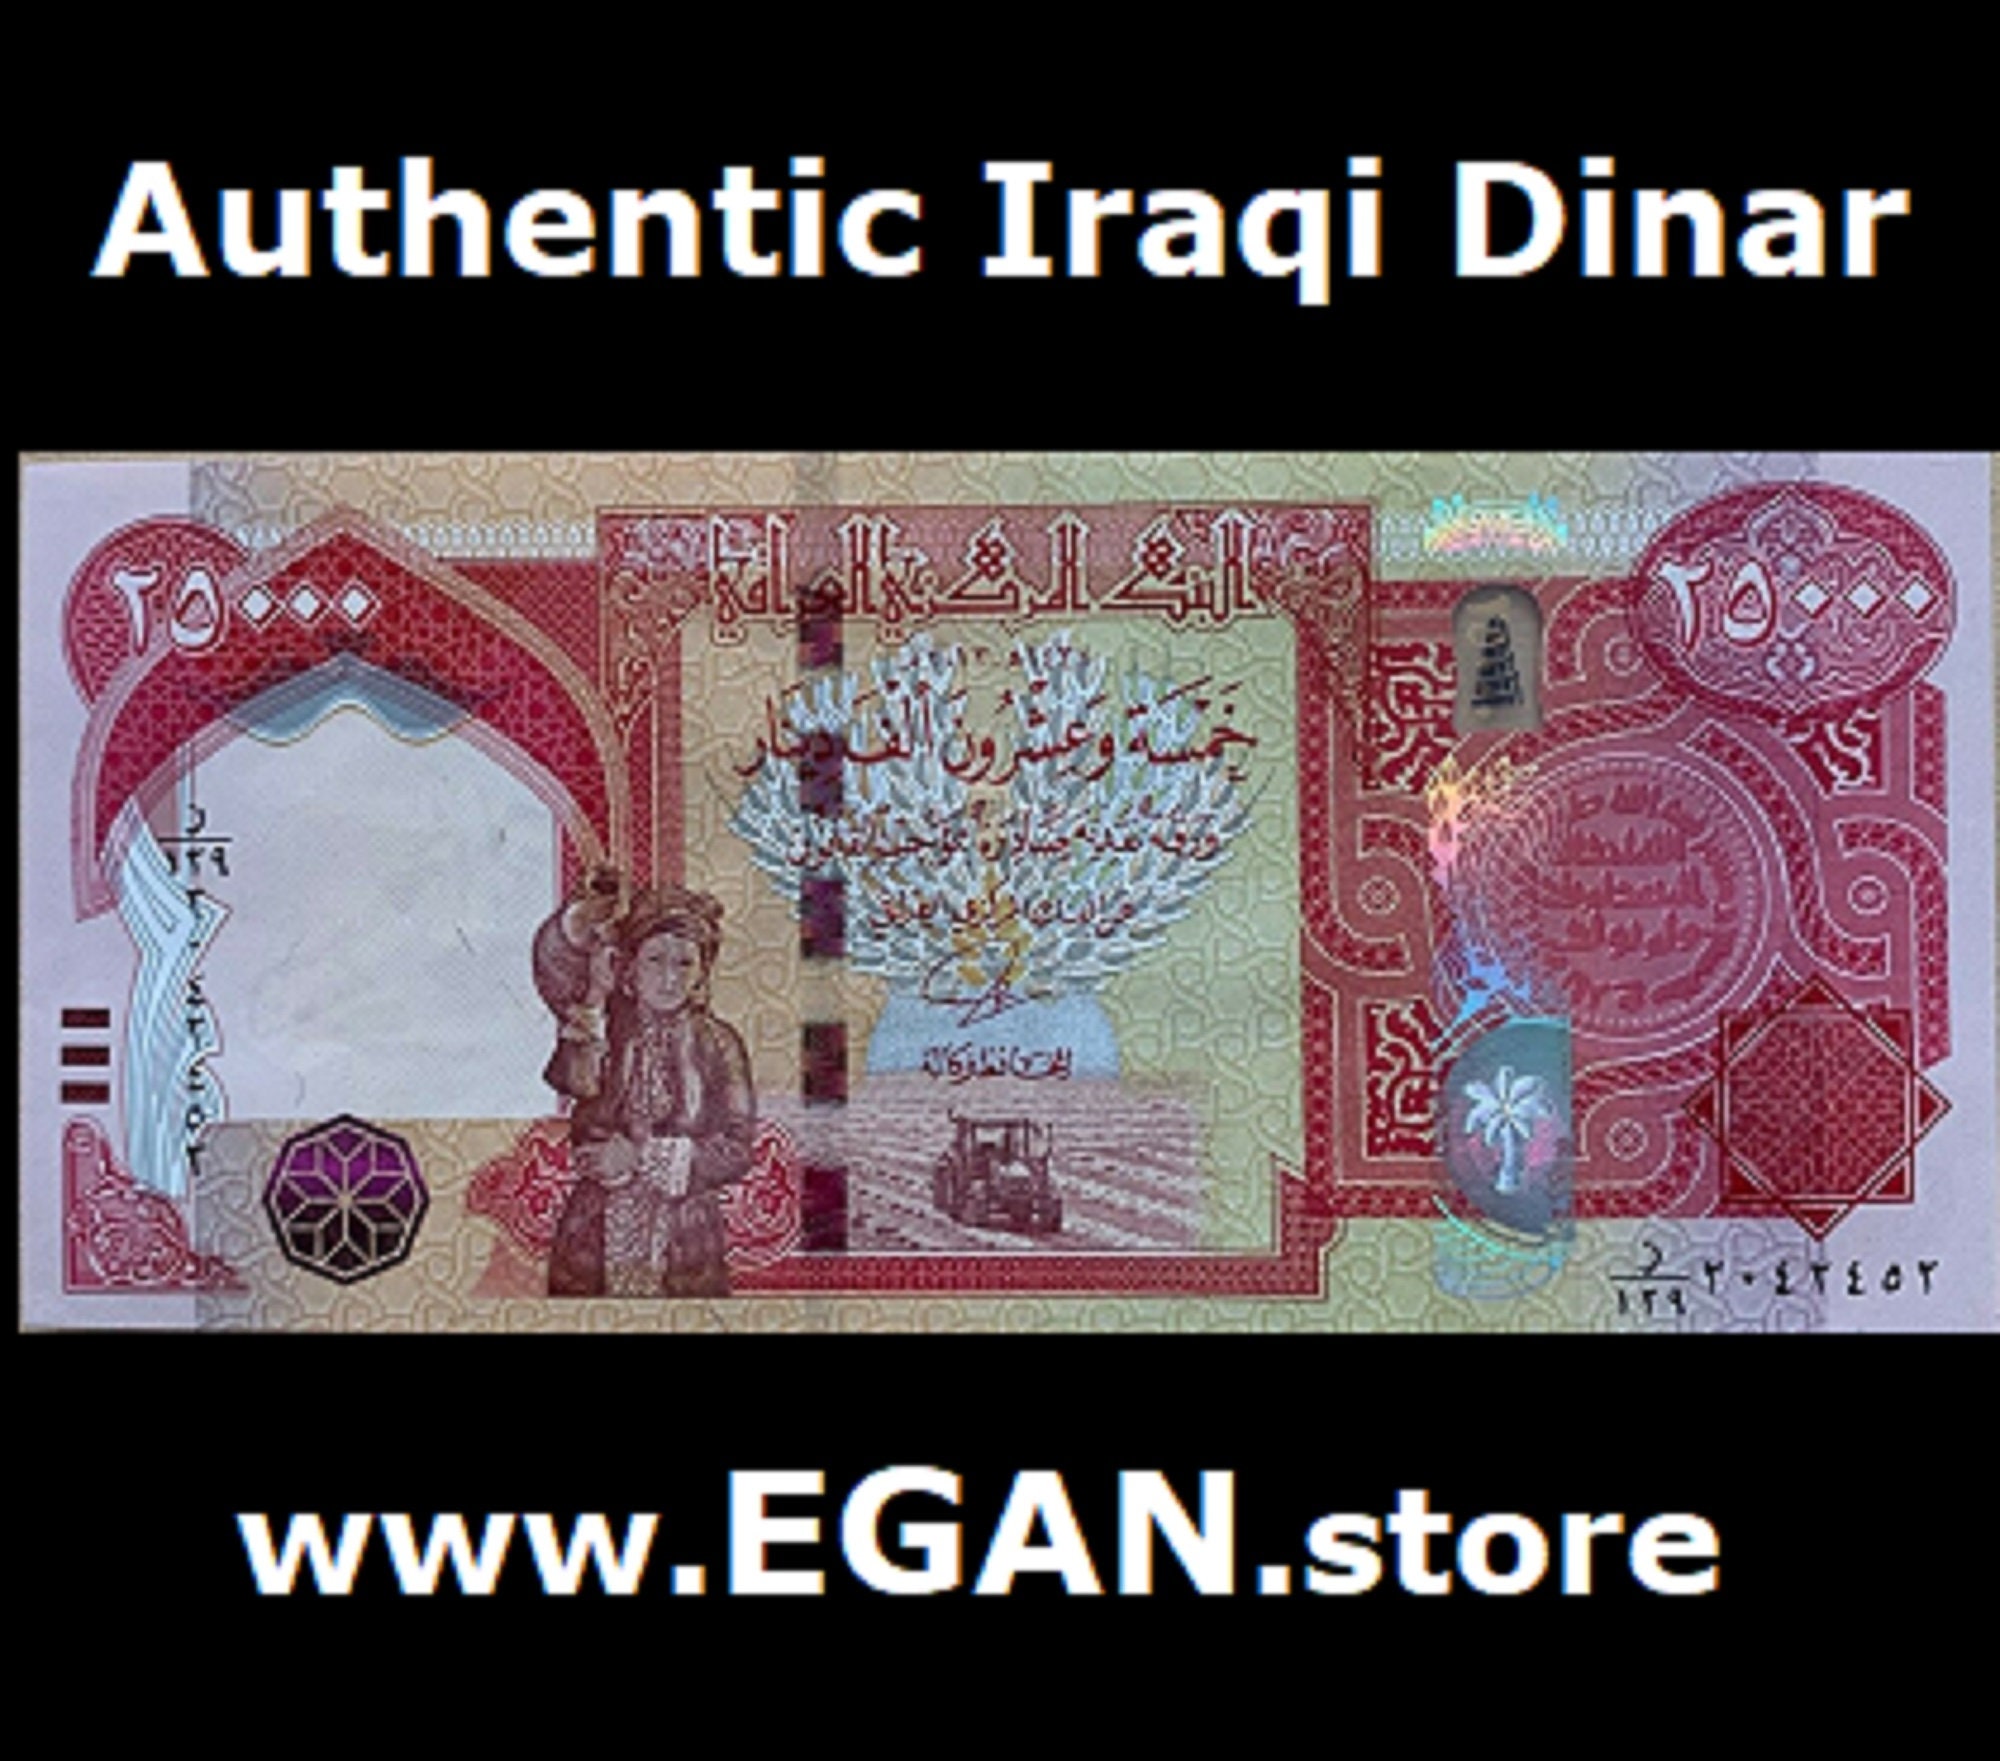 25,000 x 10 Uncirculated Dinar Notes IQD 1/4 of A Million Authentic 25K Iraq Collector's Note with The New 2020 Security Features 250,000 New Iraqi Dinars 